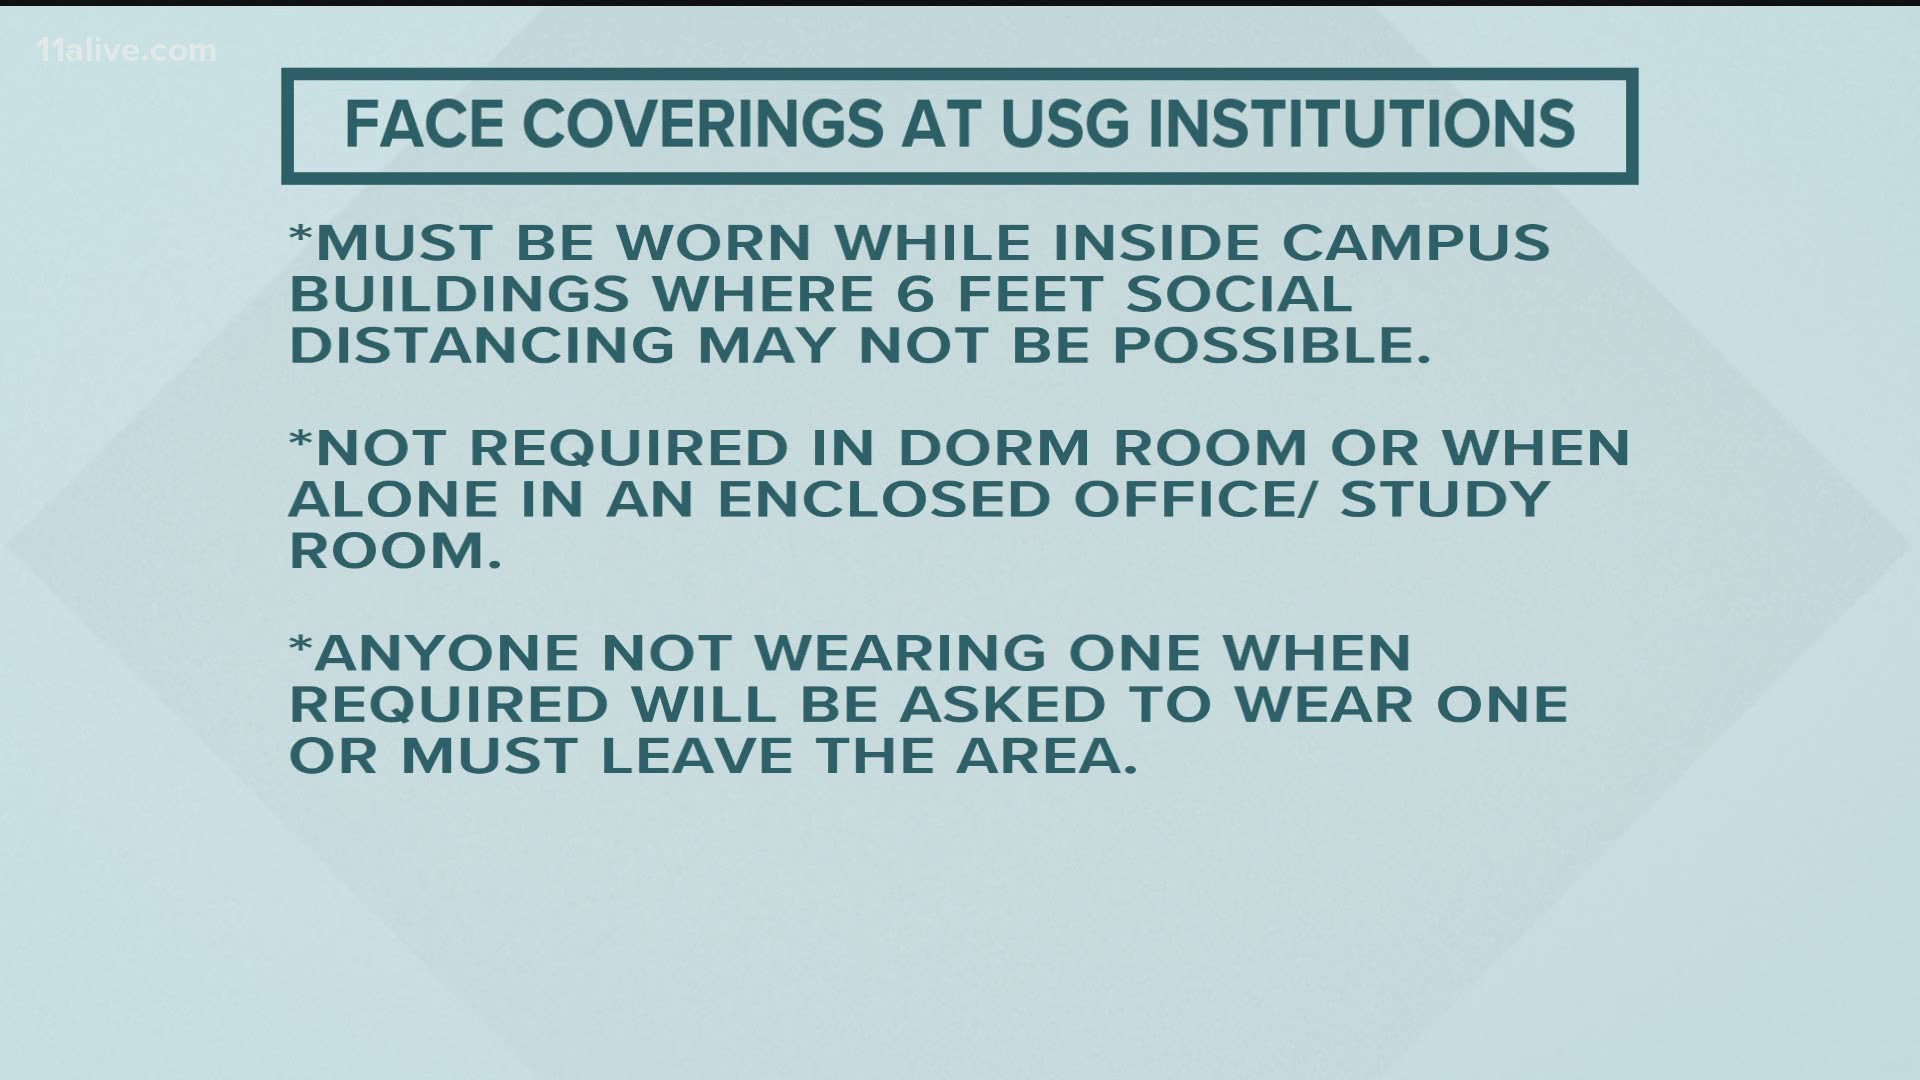 With few exceptions, students, faculty, staff and visitors will be required to wear masks while in campus buildings across the state.